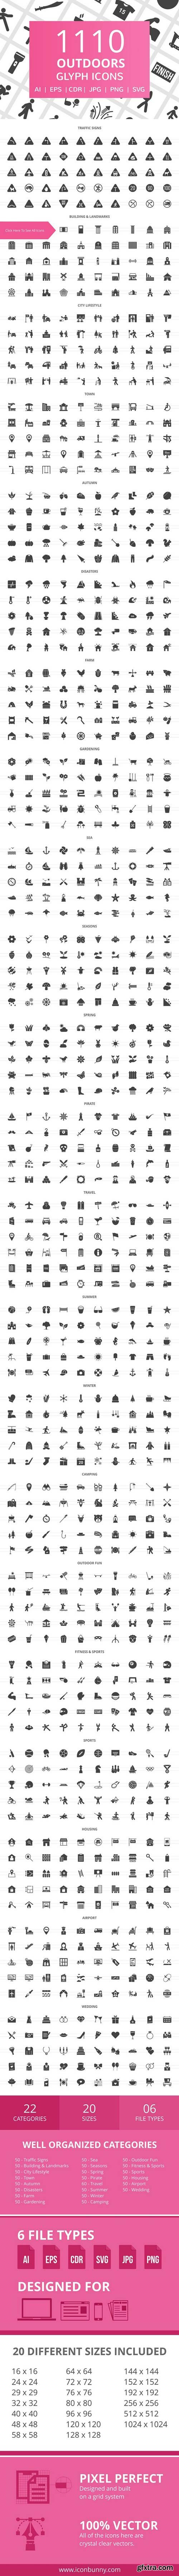 CM - 1110 Outdoors Glyph Icons 2041477